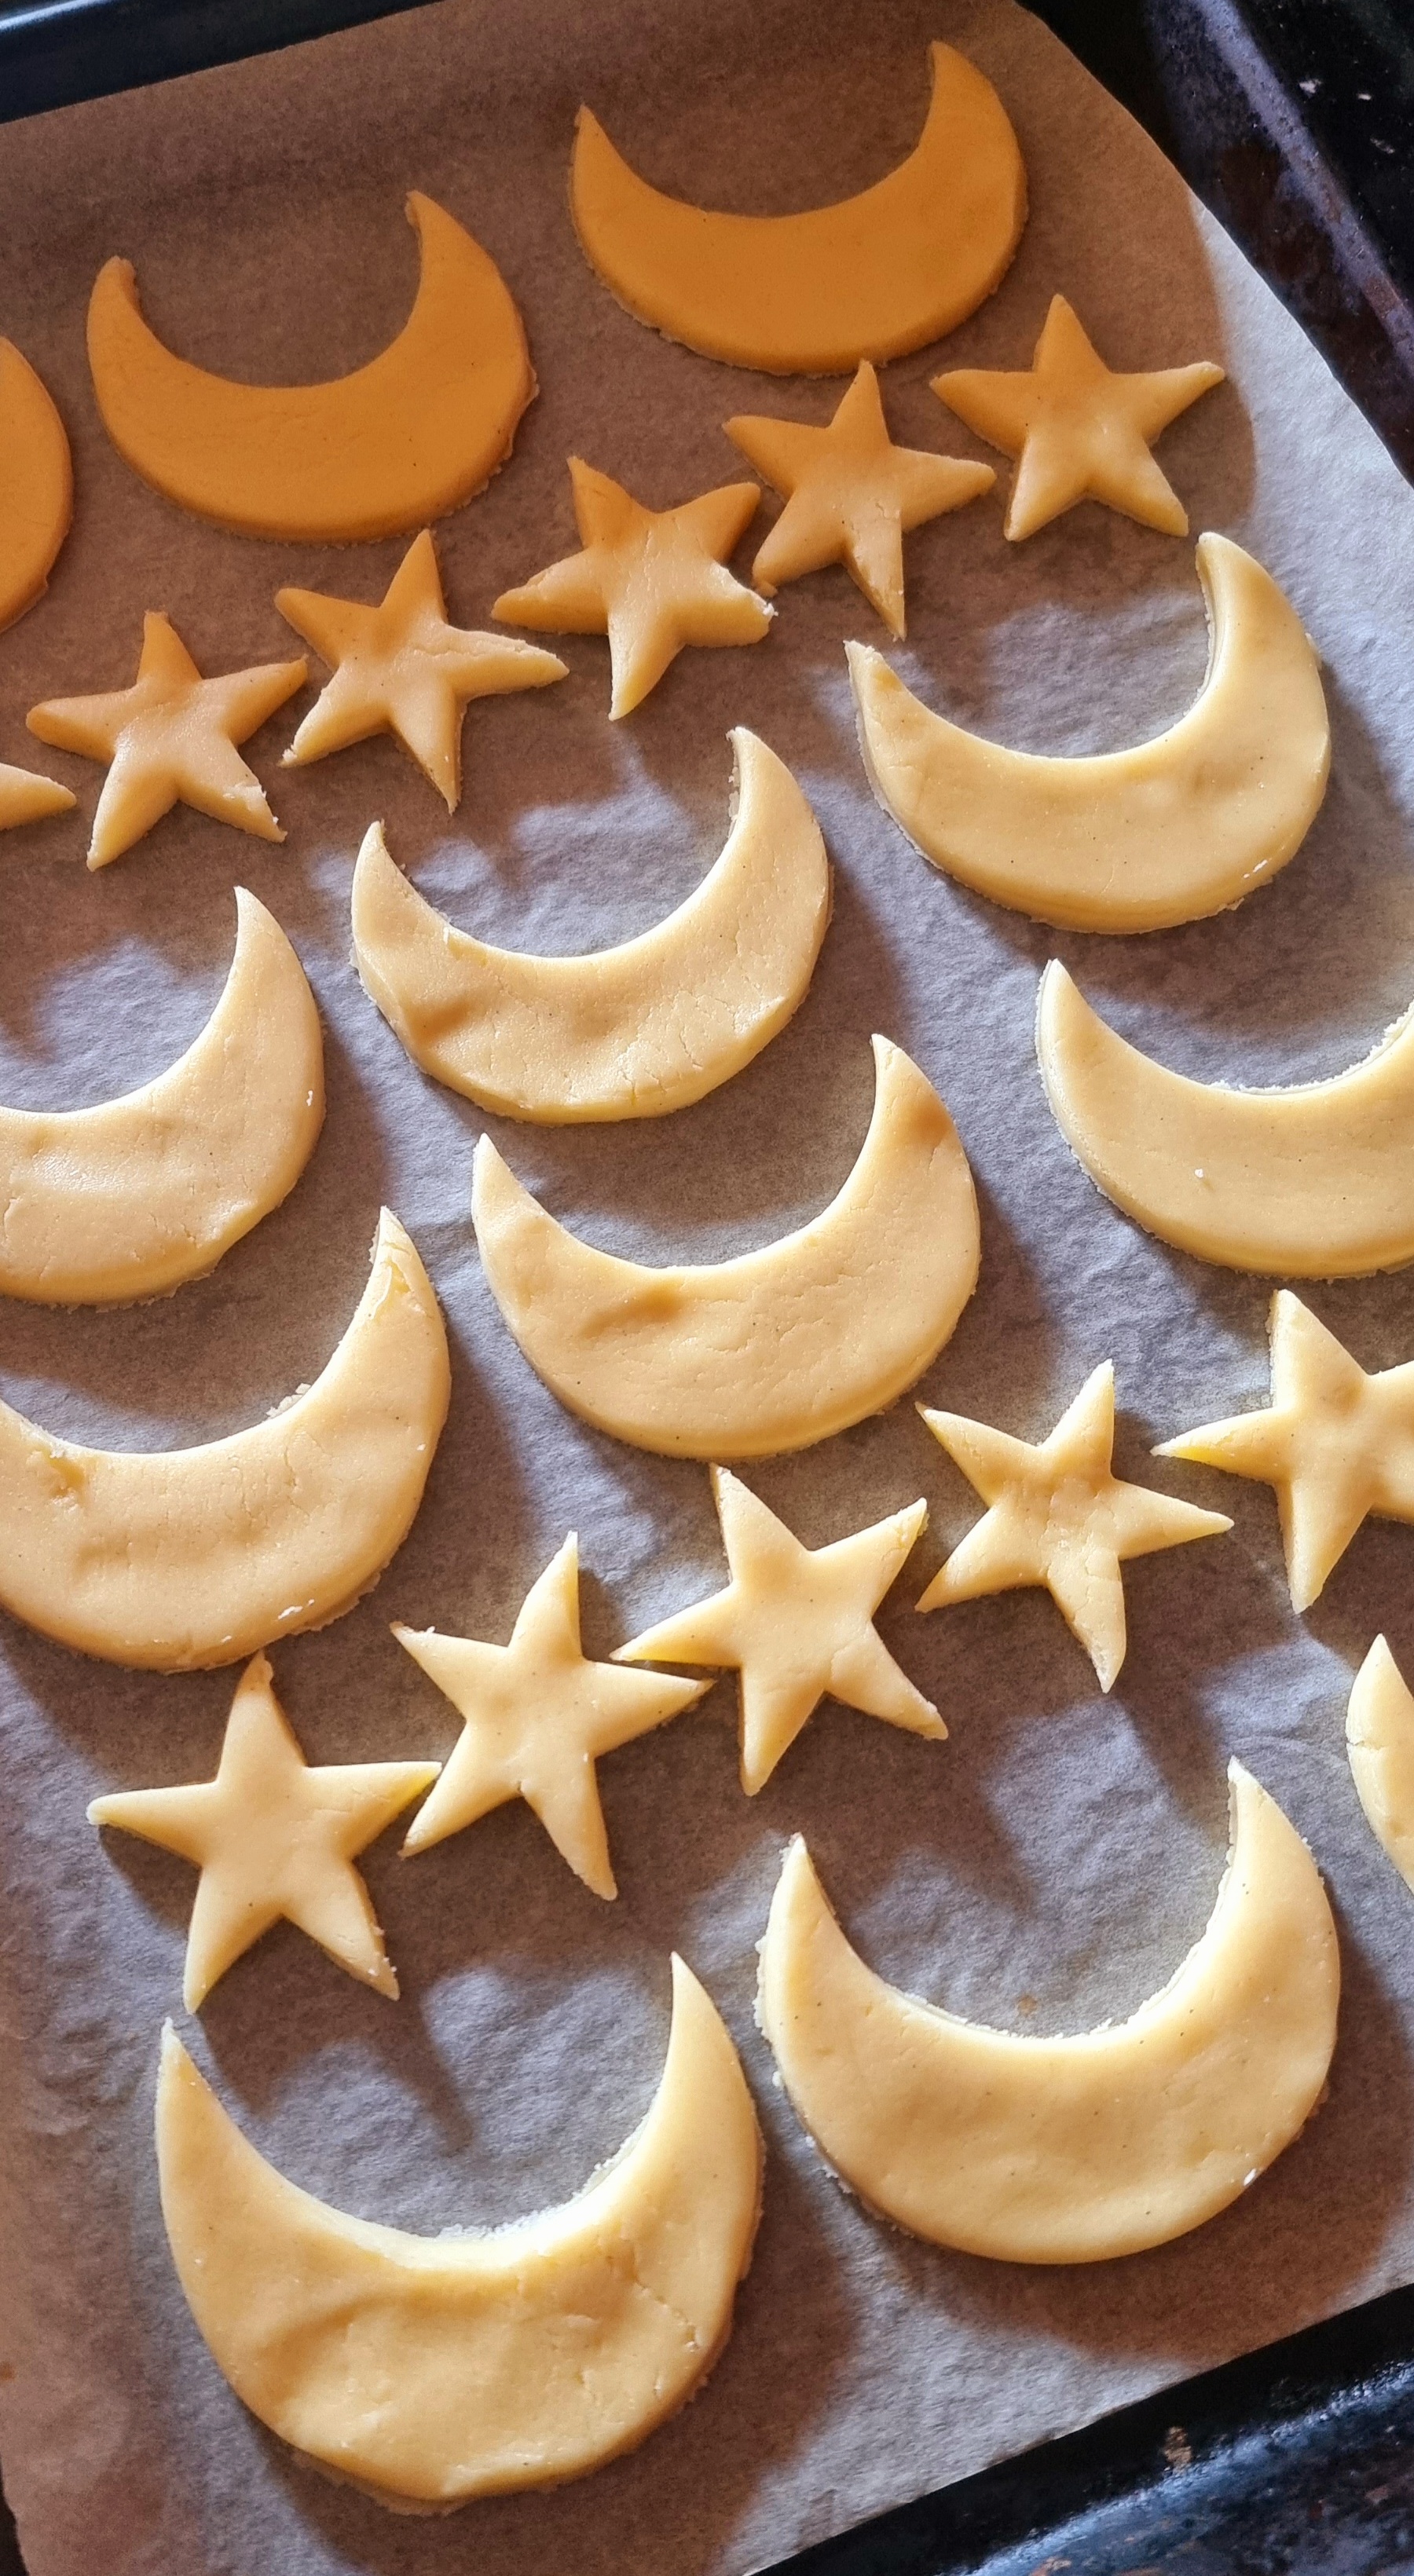 Moon and star cookies